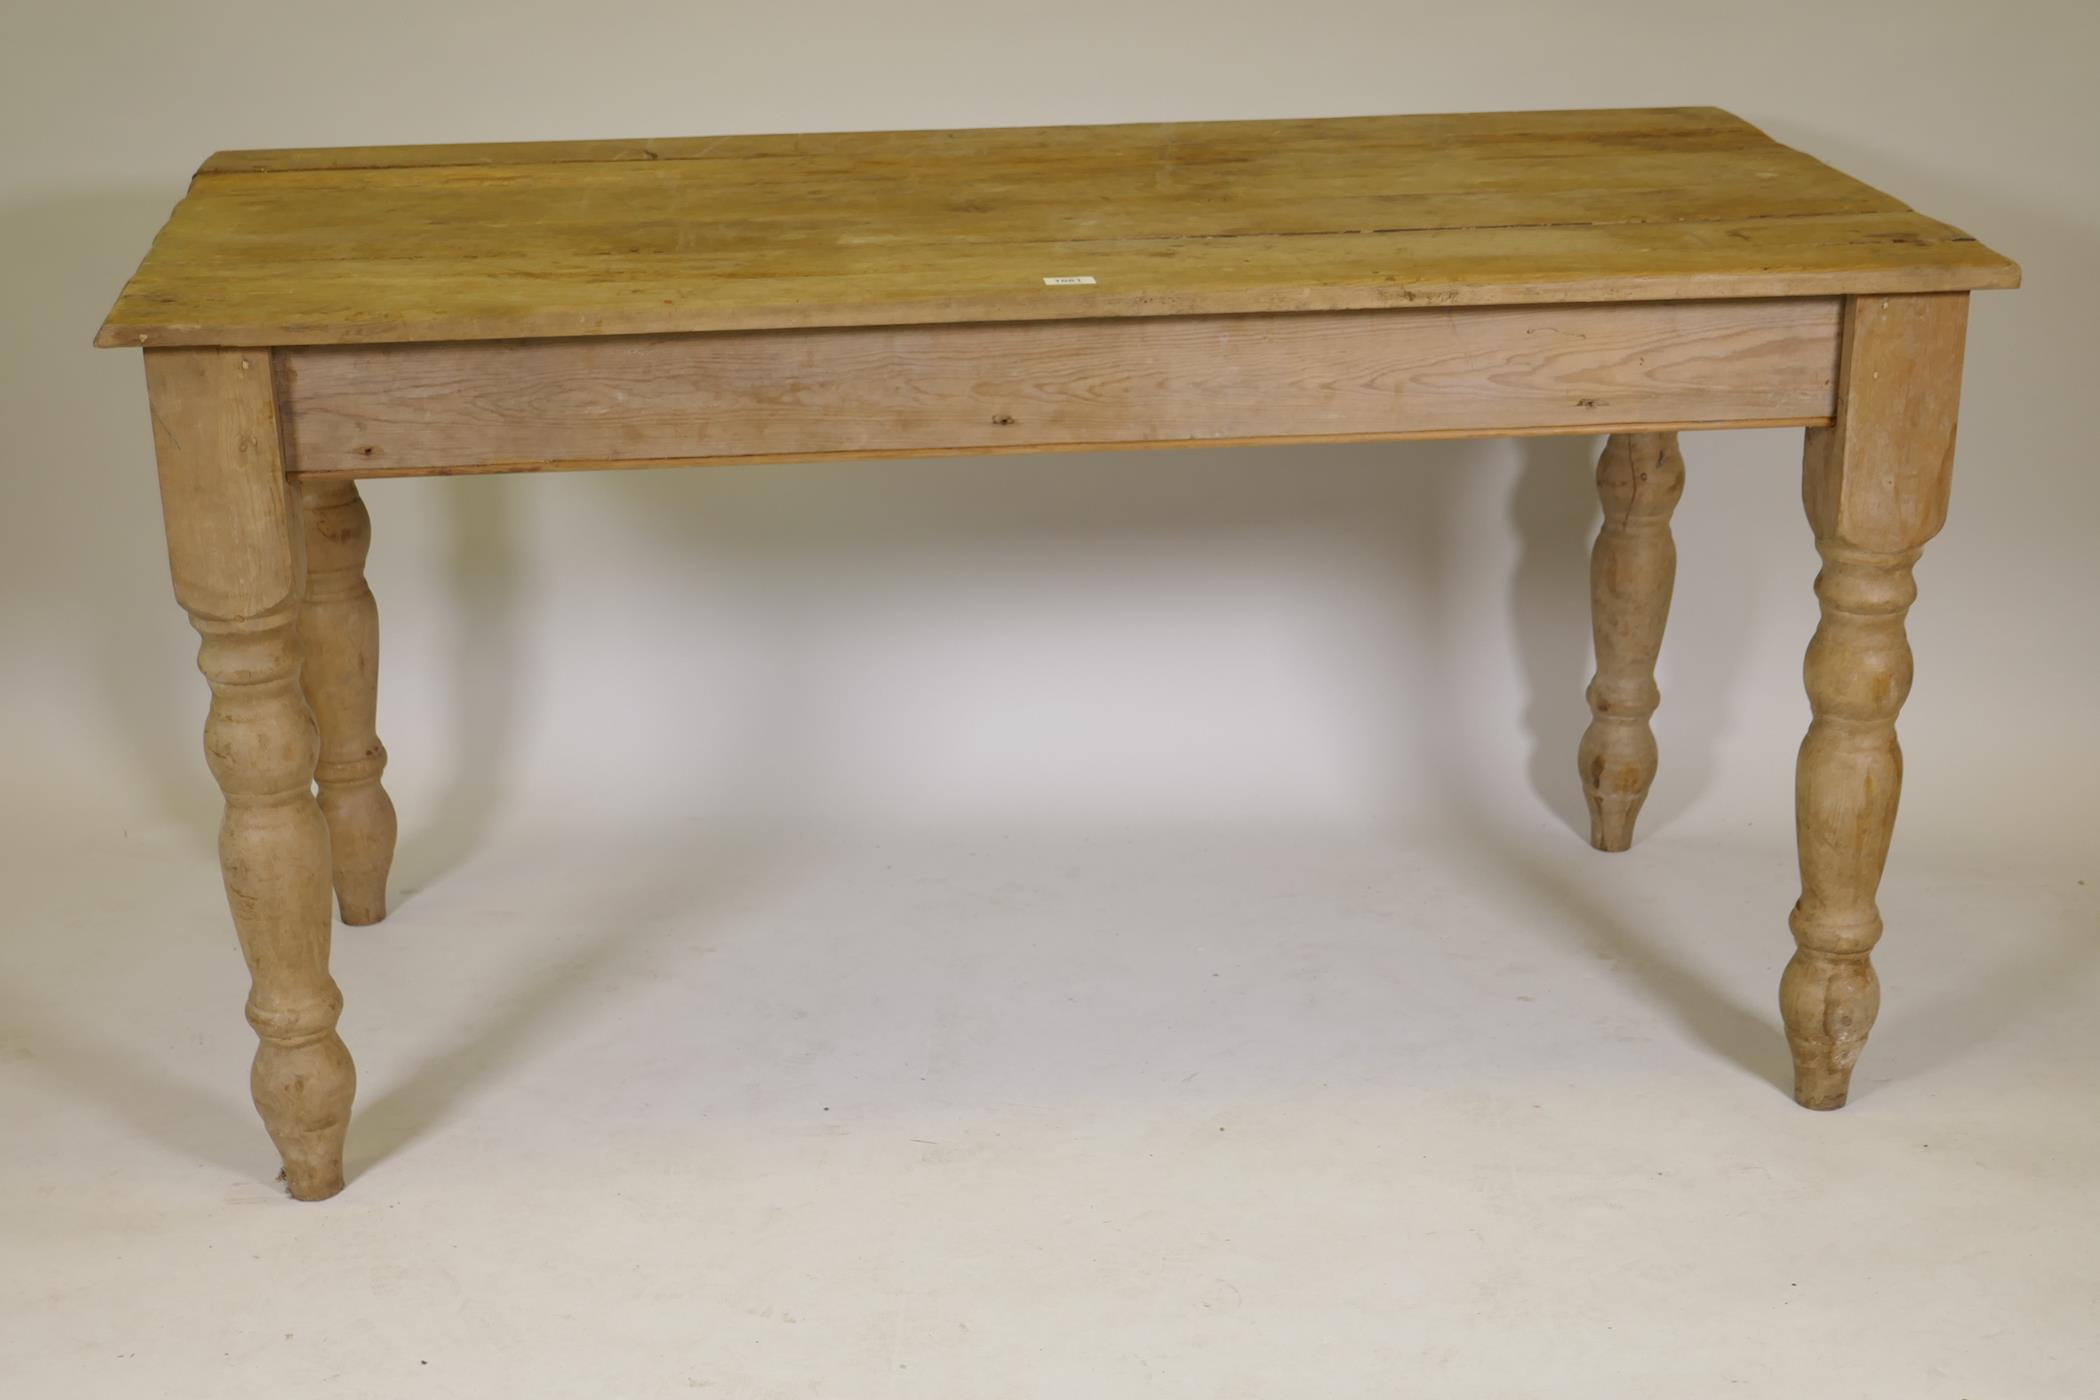 A pine scullery table with planked top, 58" x 30" x 30"